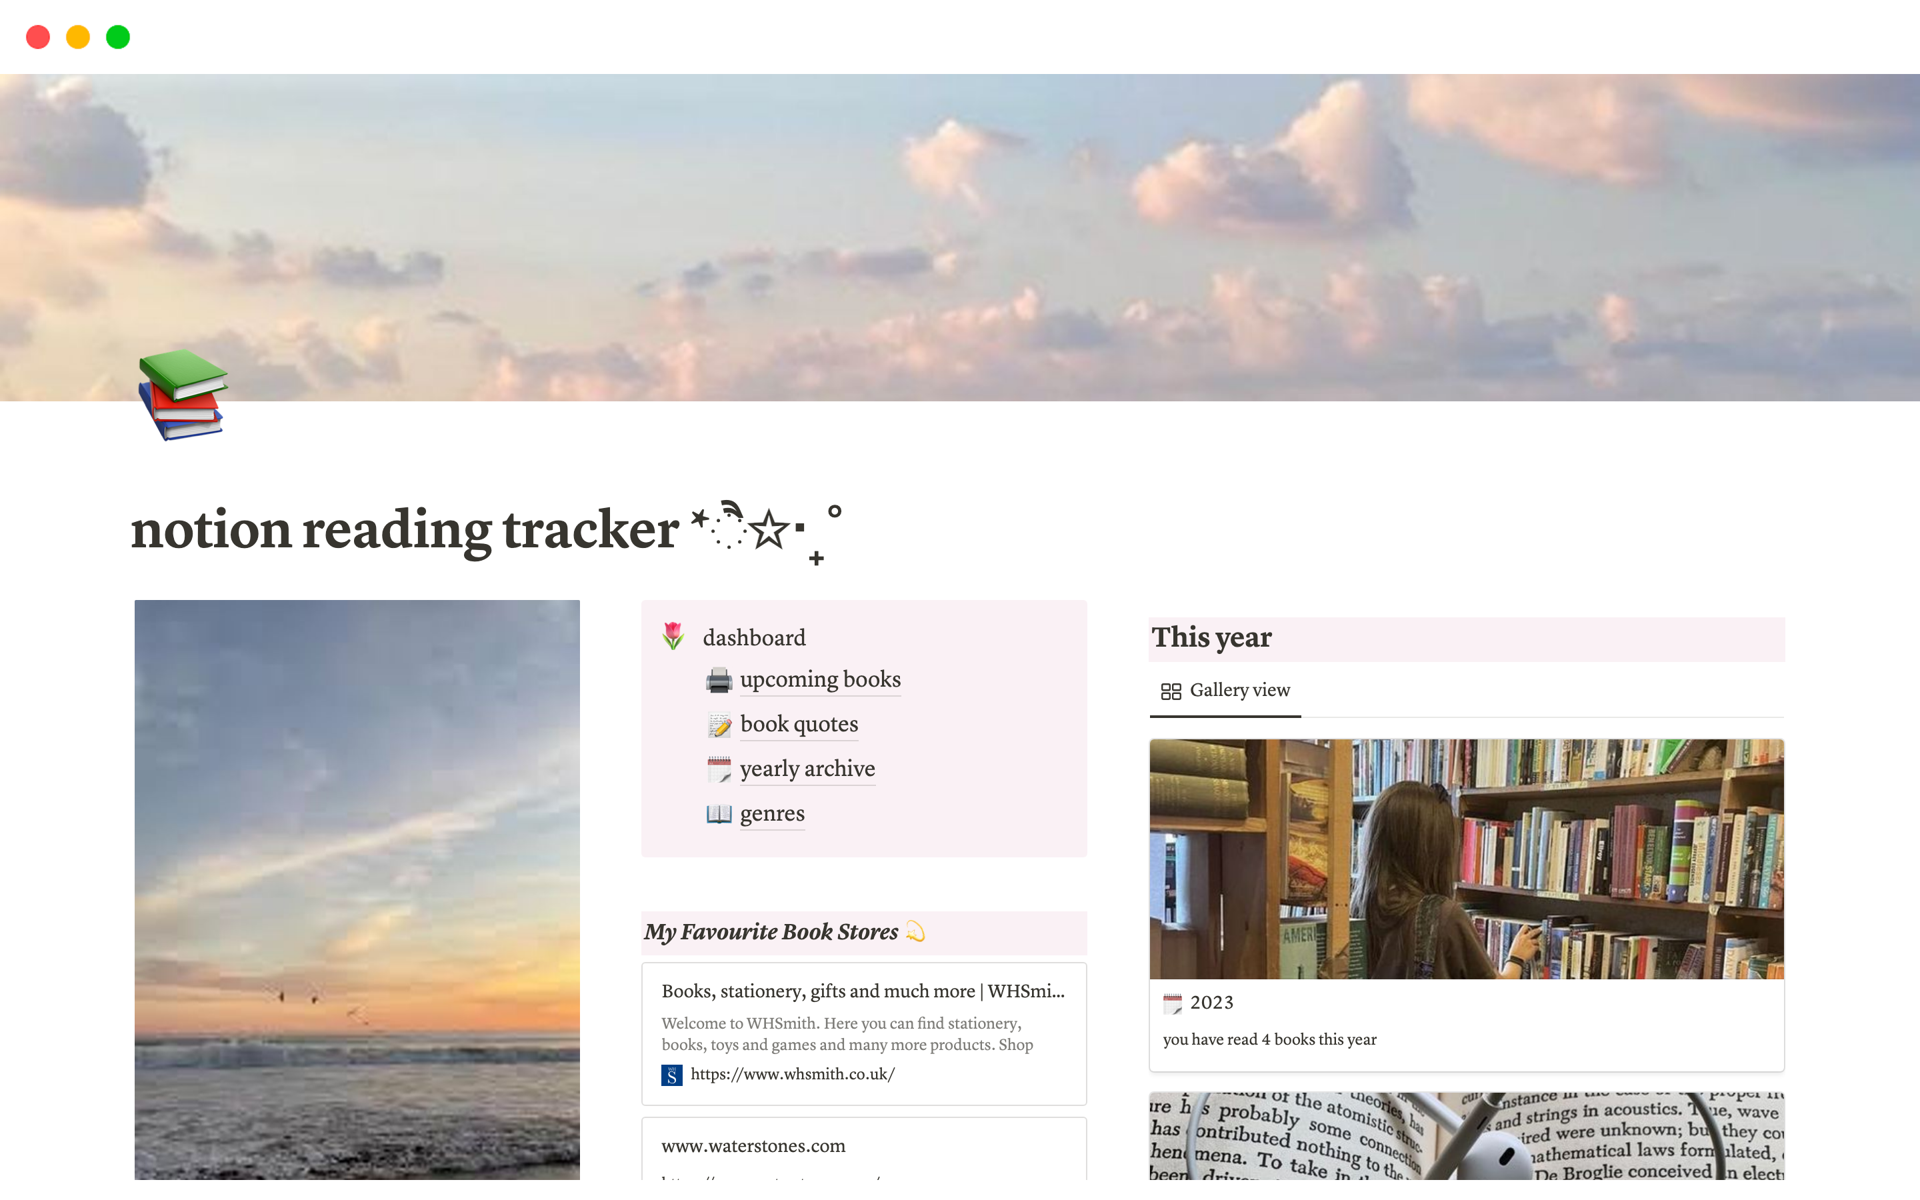 This Aesthetic That Girl Notion reading library tracker is the perfect solution for keeping track of your book consumption.